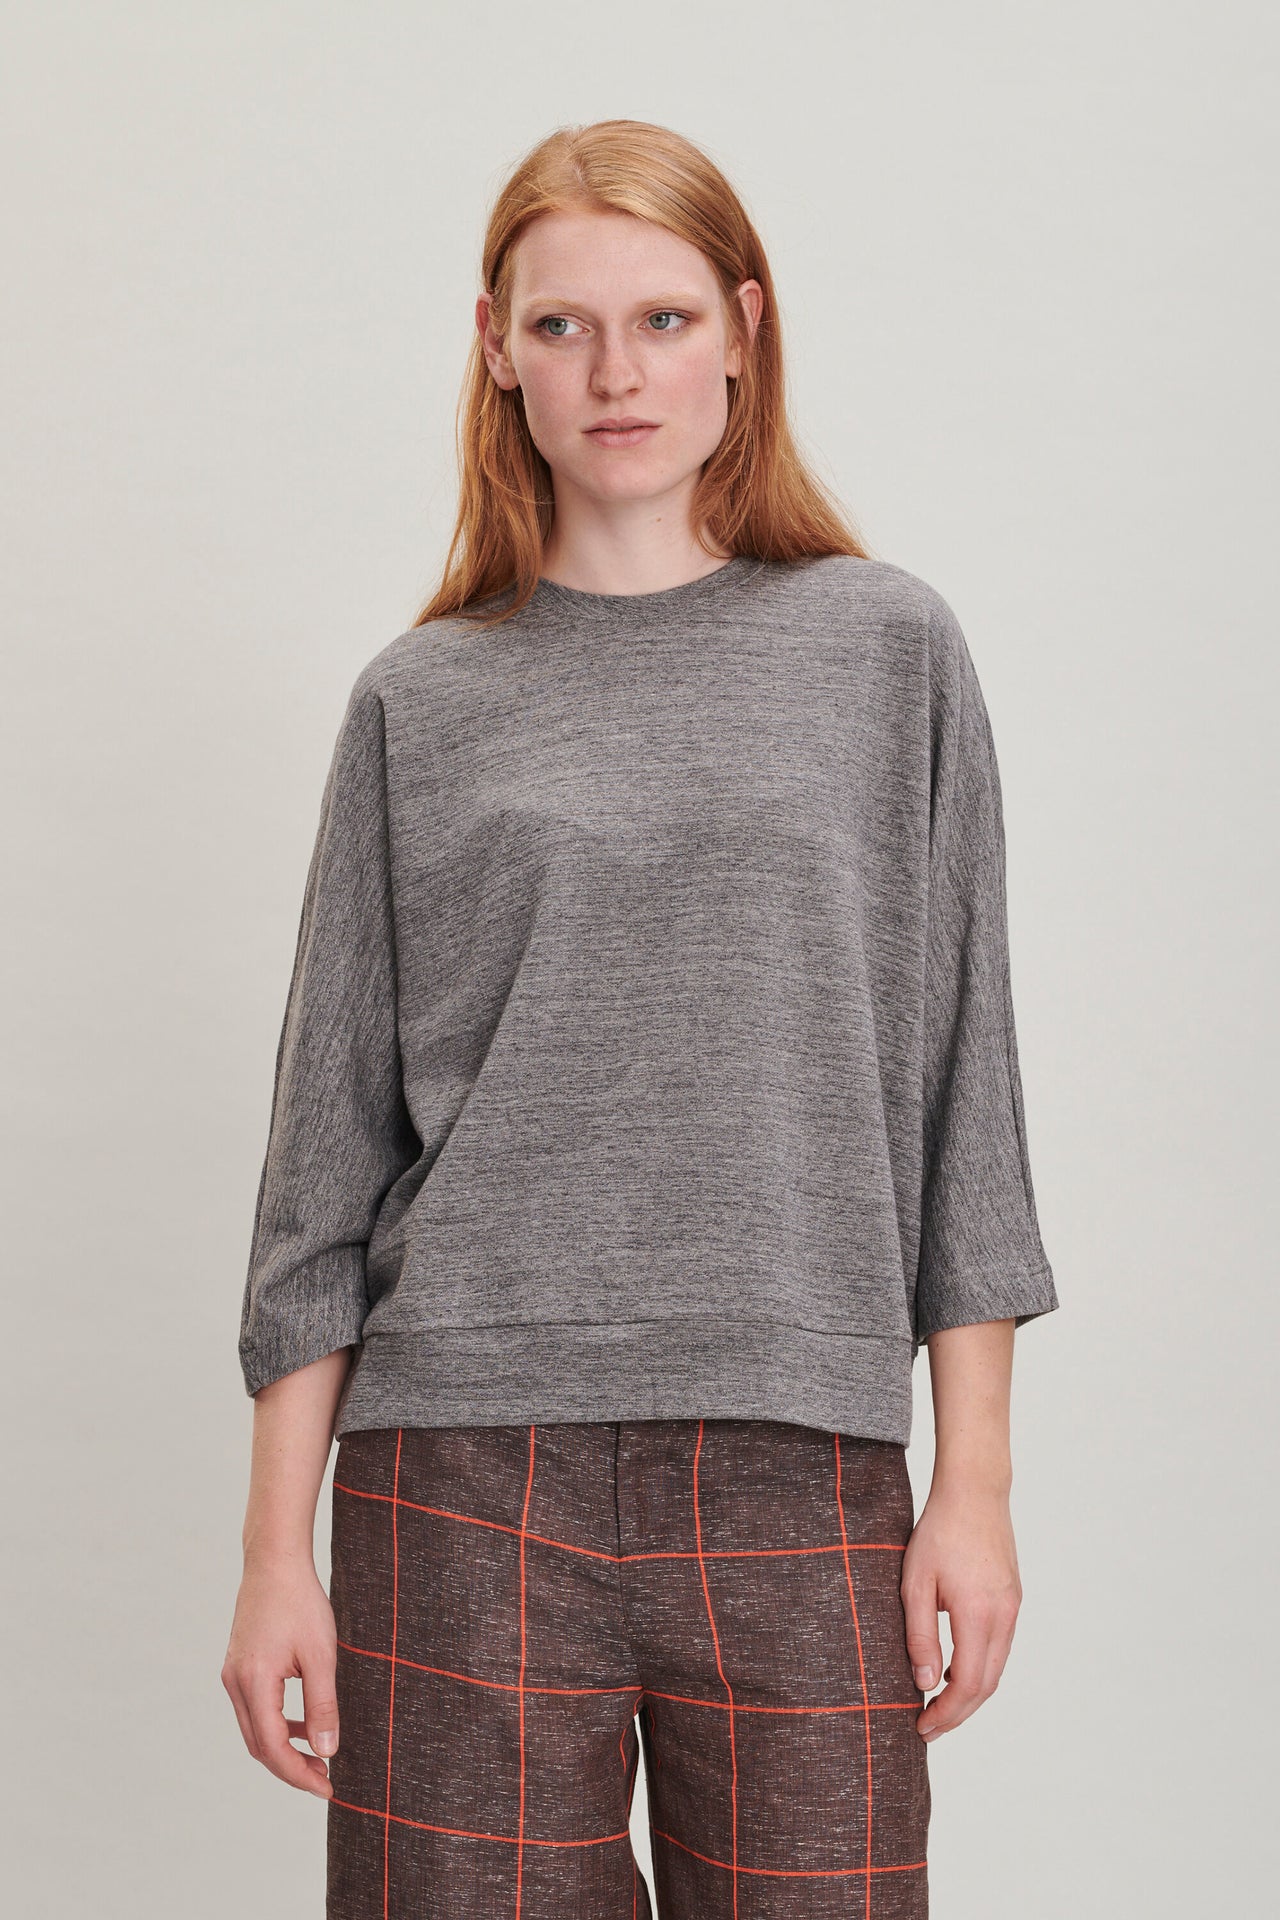 Long Sleeve Top in a Grey Fine Japanese Cotton Jersey